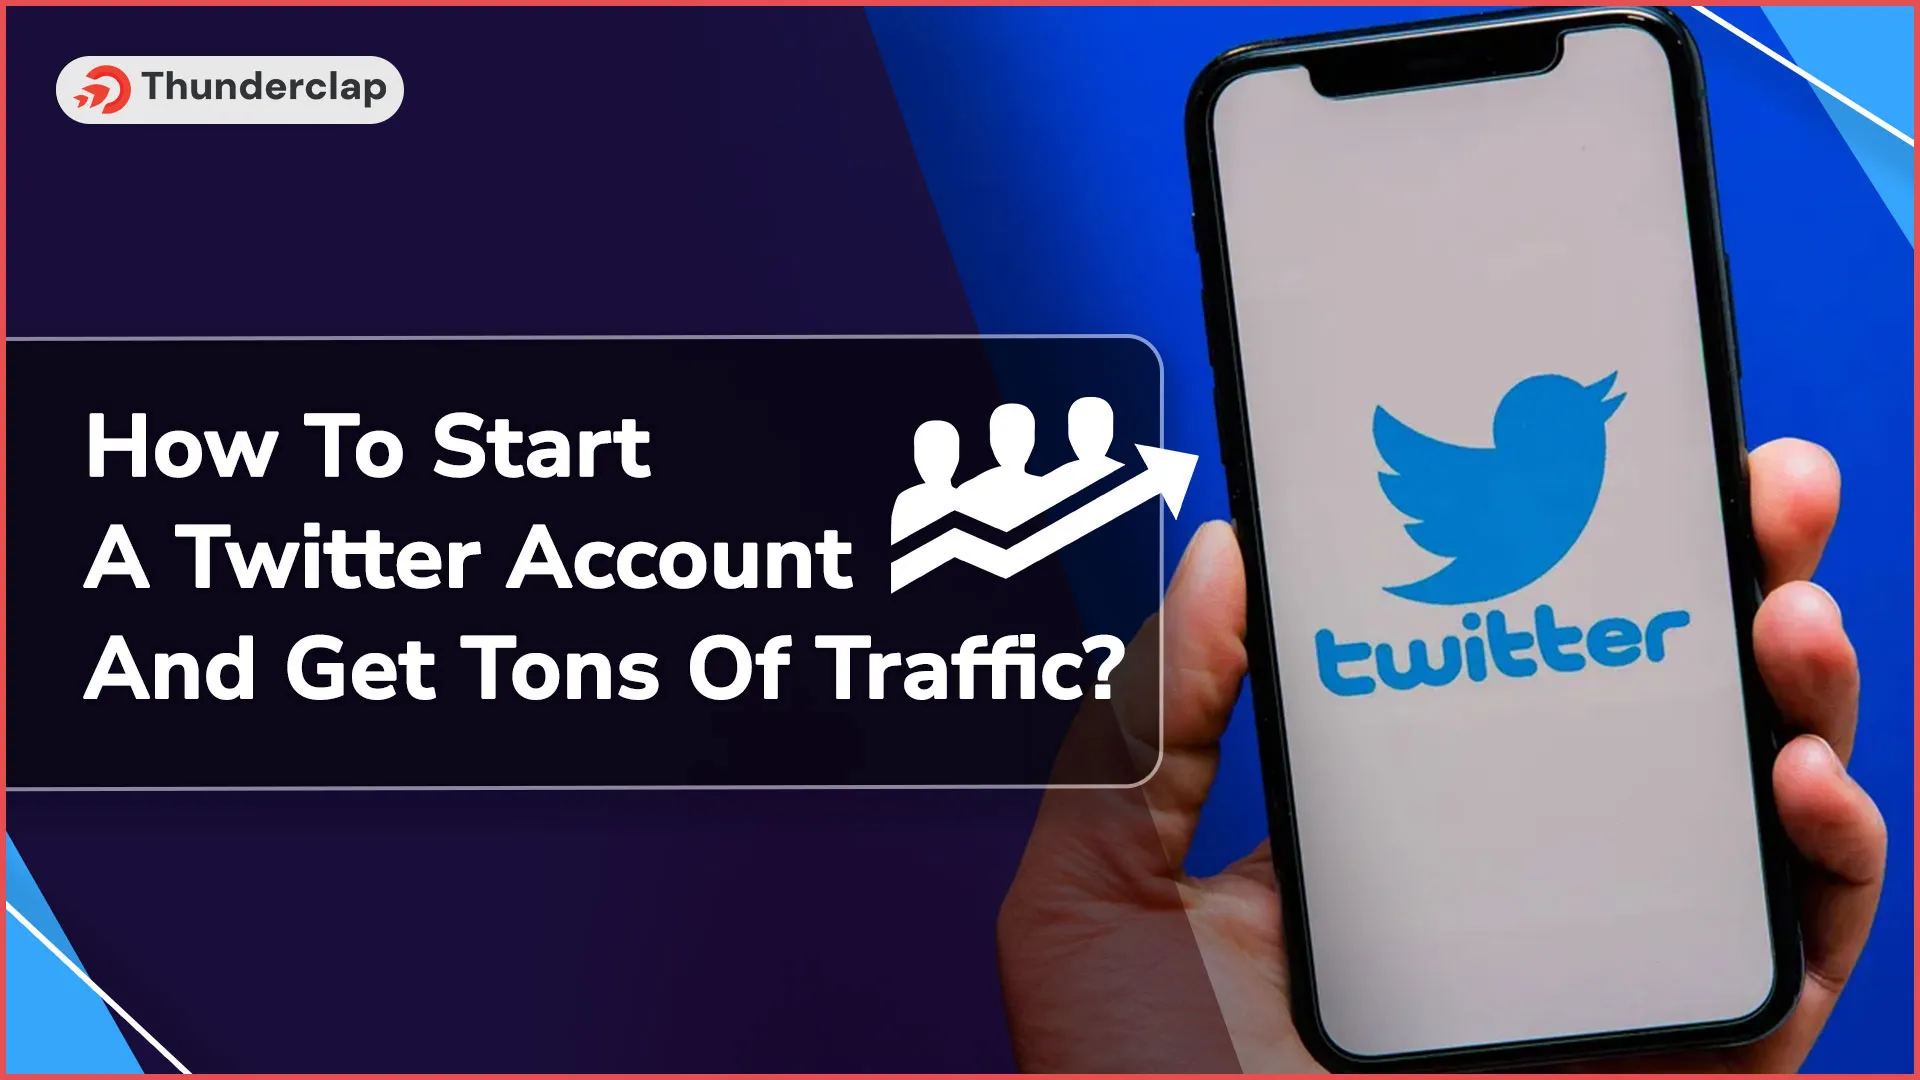 How To Start A Twitter Account And Get Tons Of Traffic